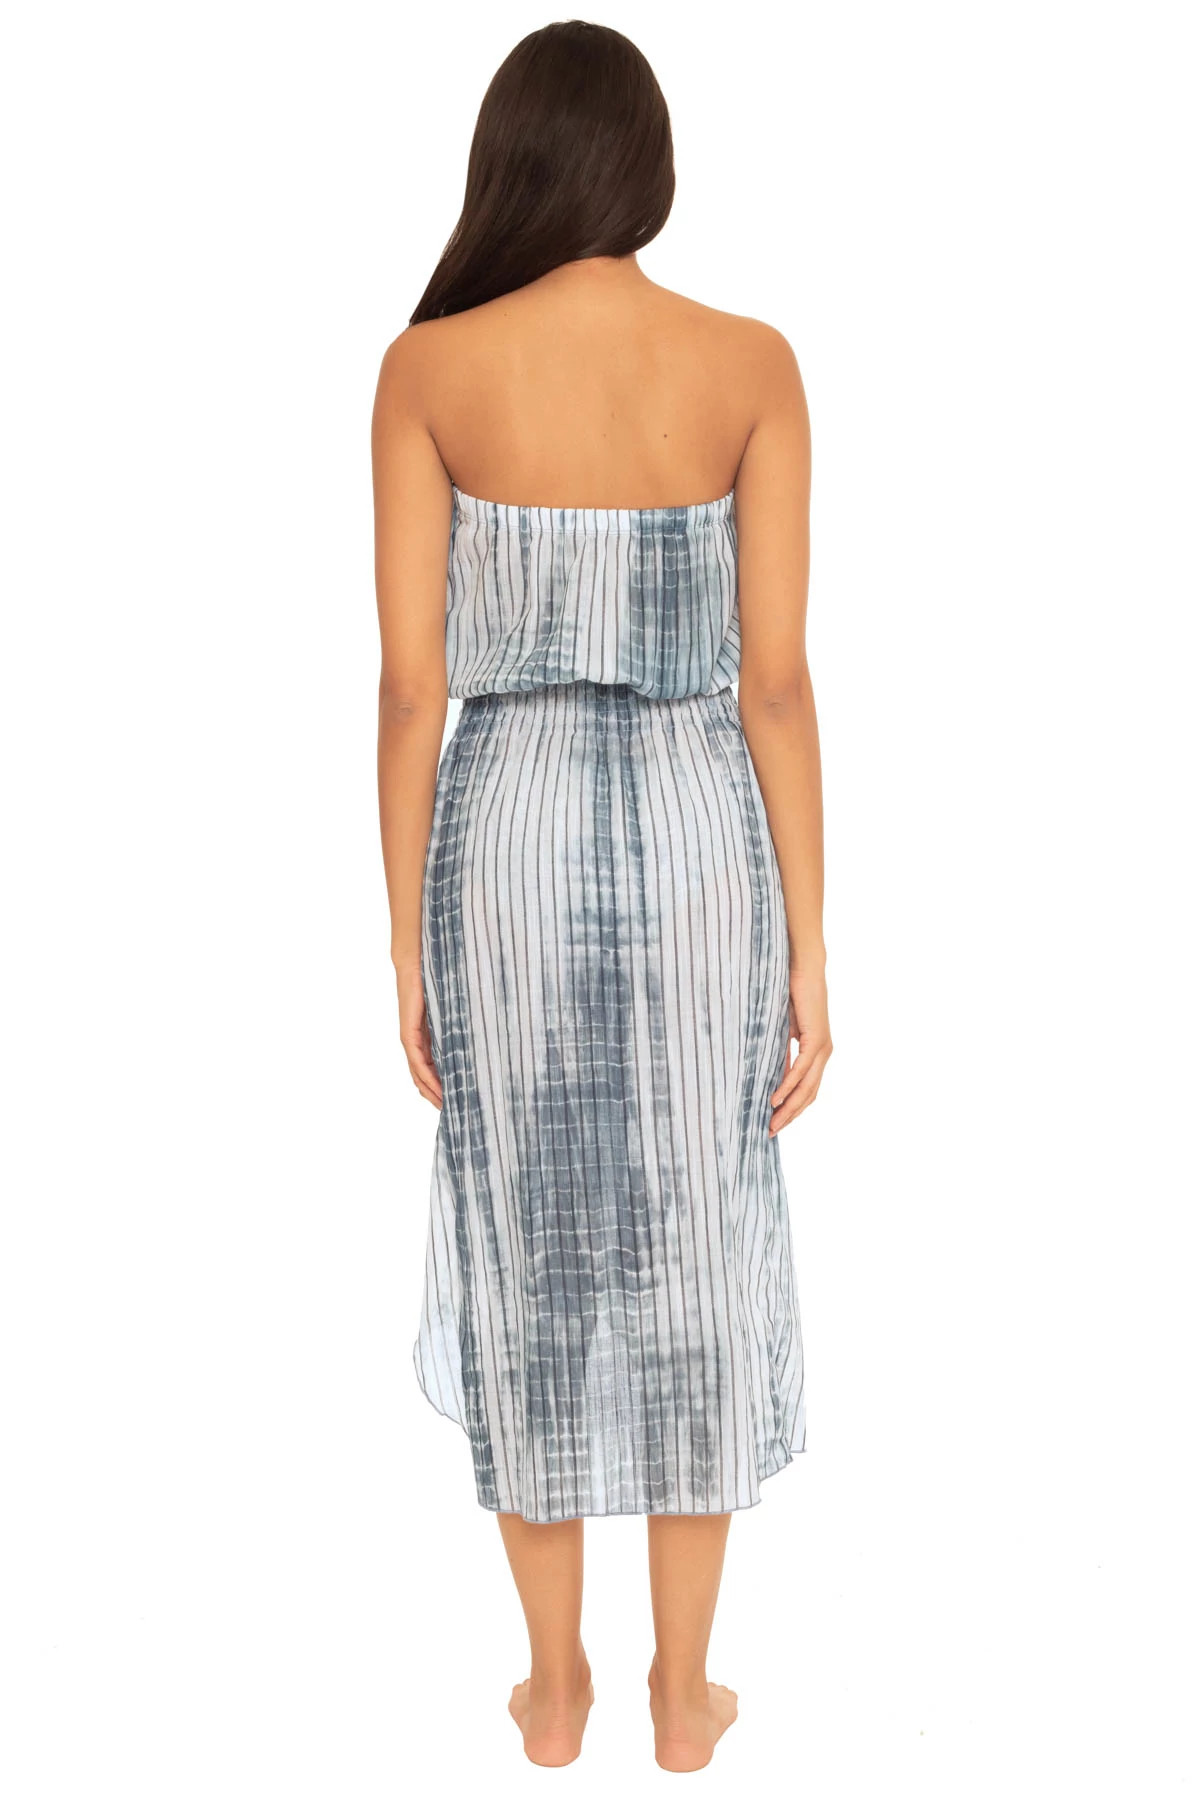 ULTIMATE GRAY Tie-Dye Smocked Strapless Dress image number 2